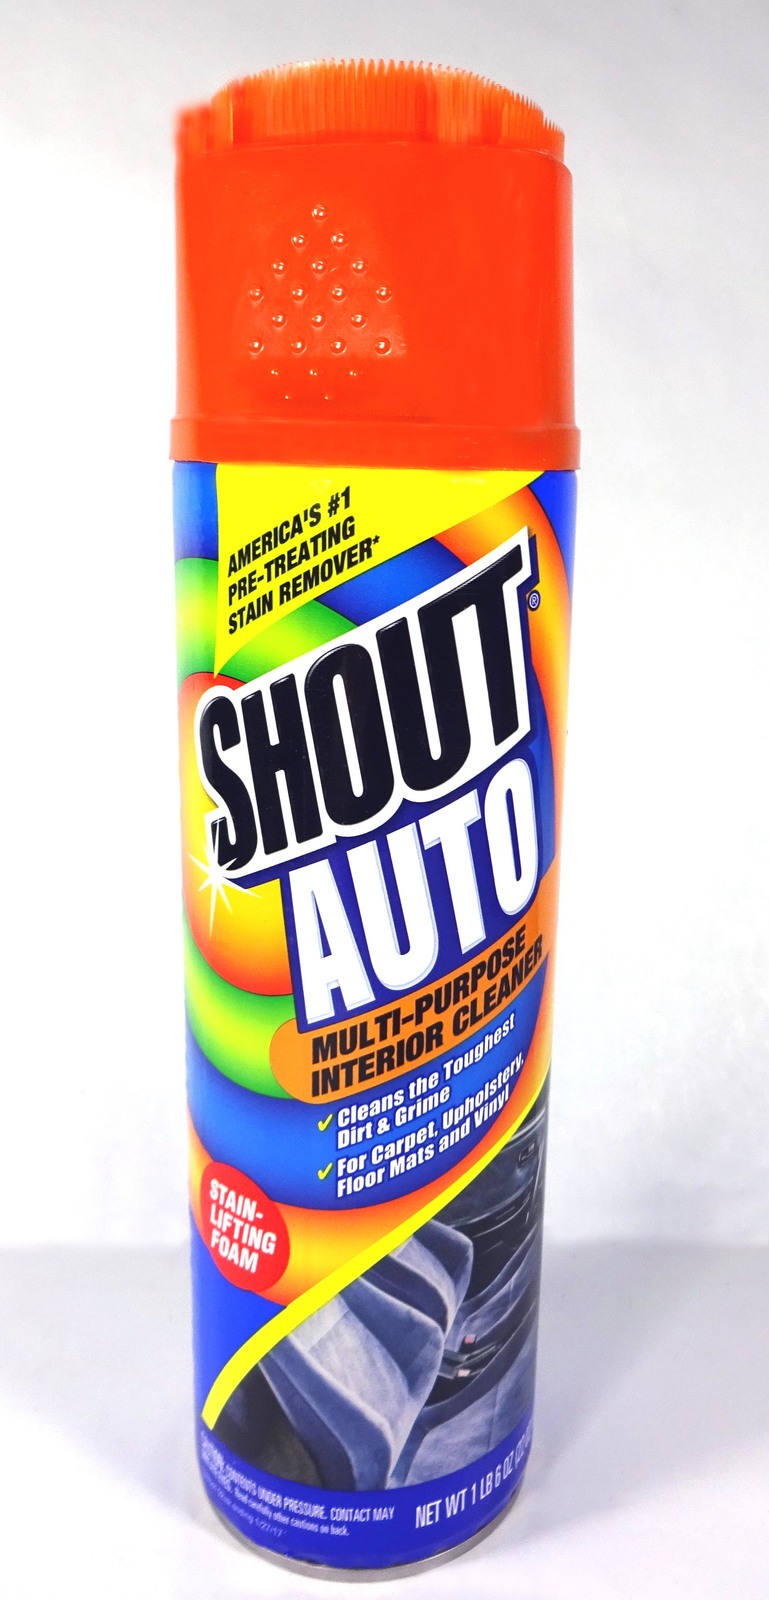 Primary image for Shout Auto Multi Purpose Interior Cleaner, Stain Lifting Foam (22 oz Spray Can)